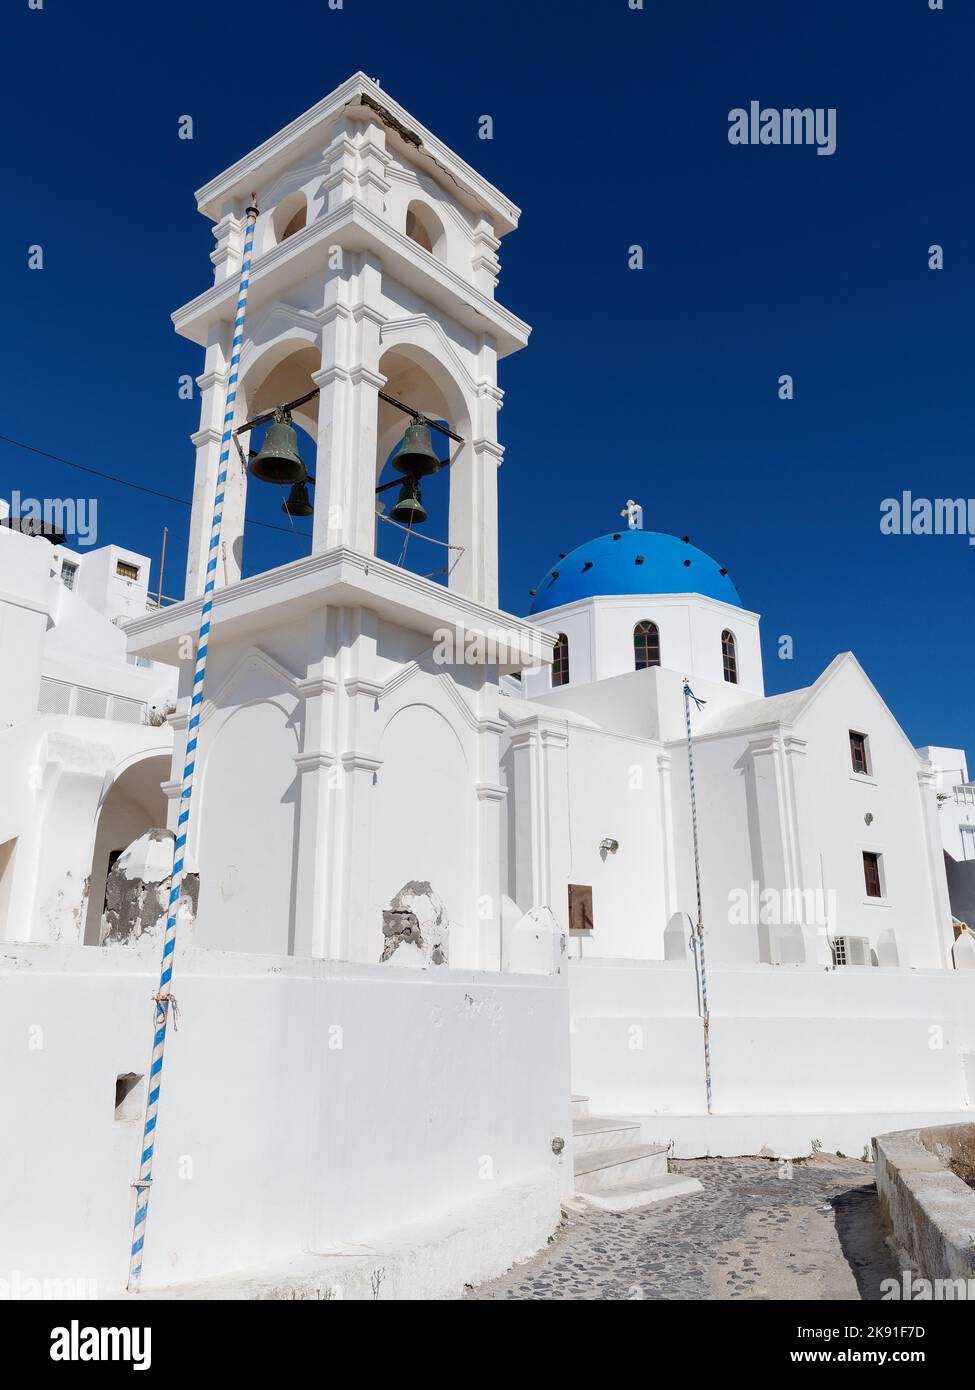 Traditional blue domed church in the town of Imerovigli on the Greek Cyclades island of Santorini in the Aegean Sea Stock Photo